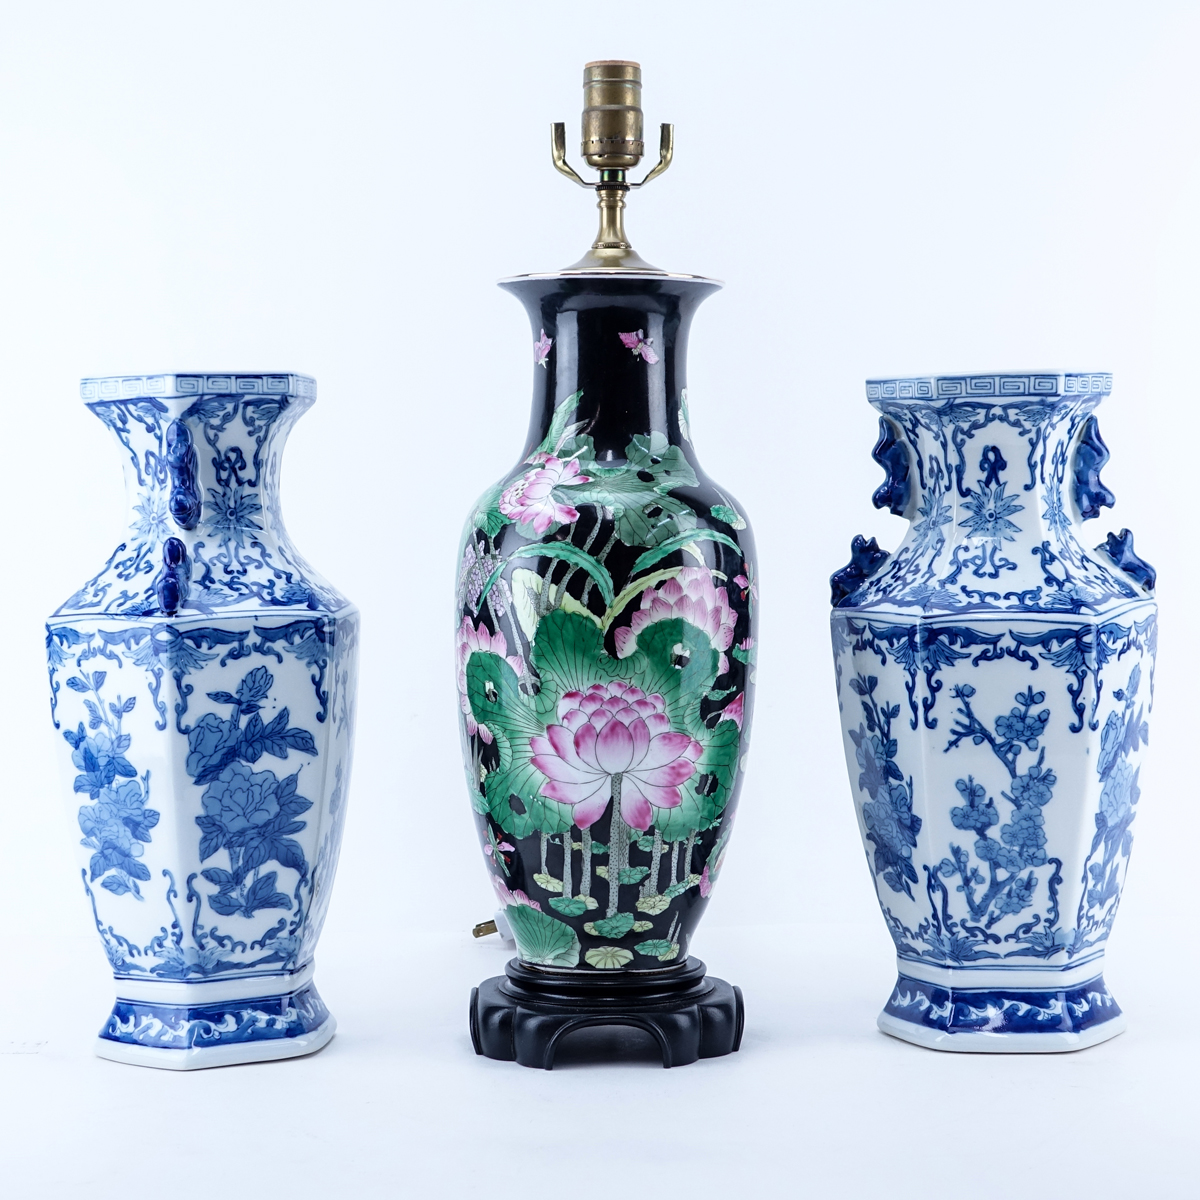 Grouping of Three (3): Pair of Chinese Blue and White Porcelain Vases, Chinese Porcelain Lamp. All in good condition.